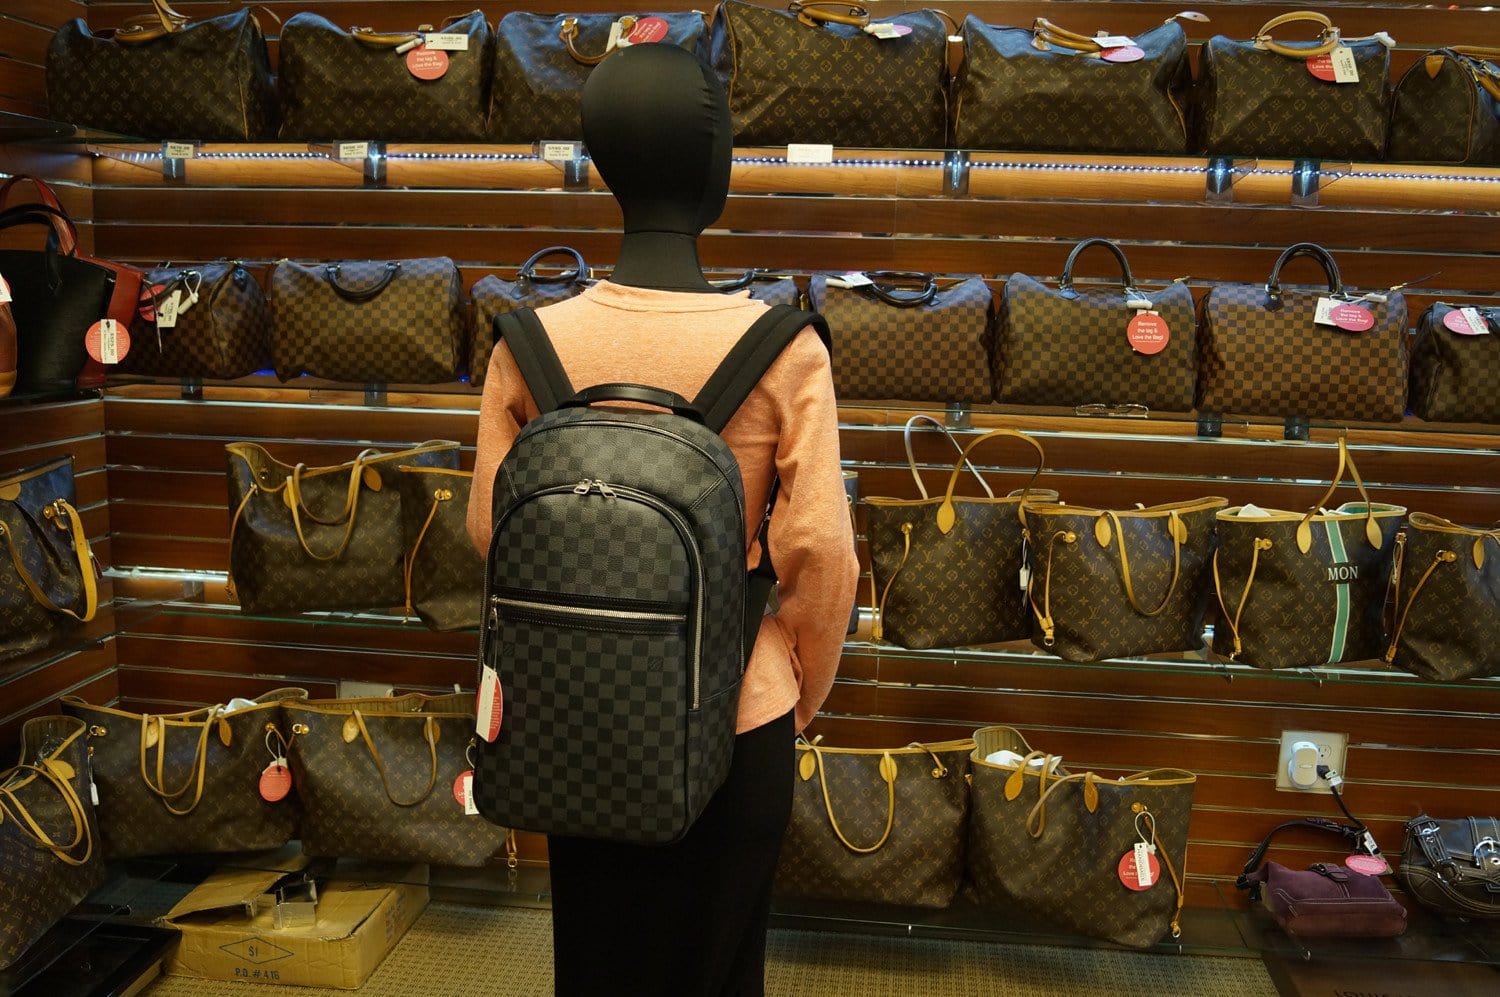 Louis Vuitton Damier Graphite Michael Backpack at 1stDibs